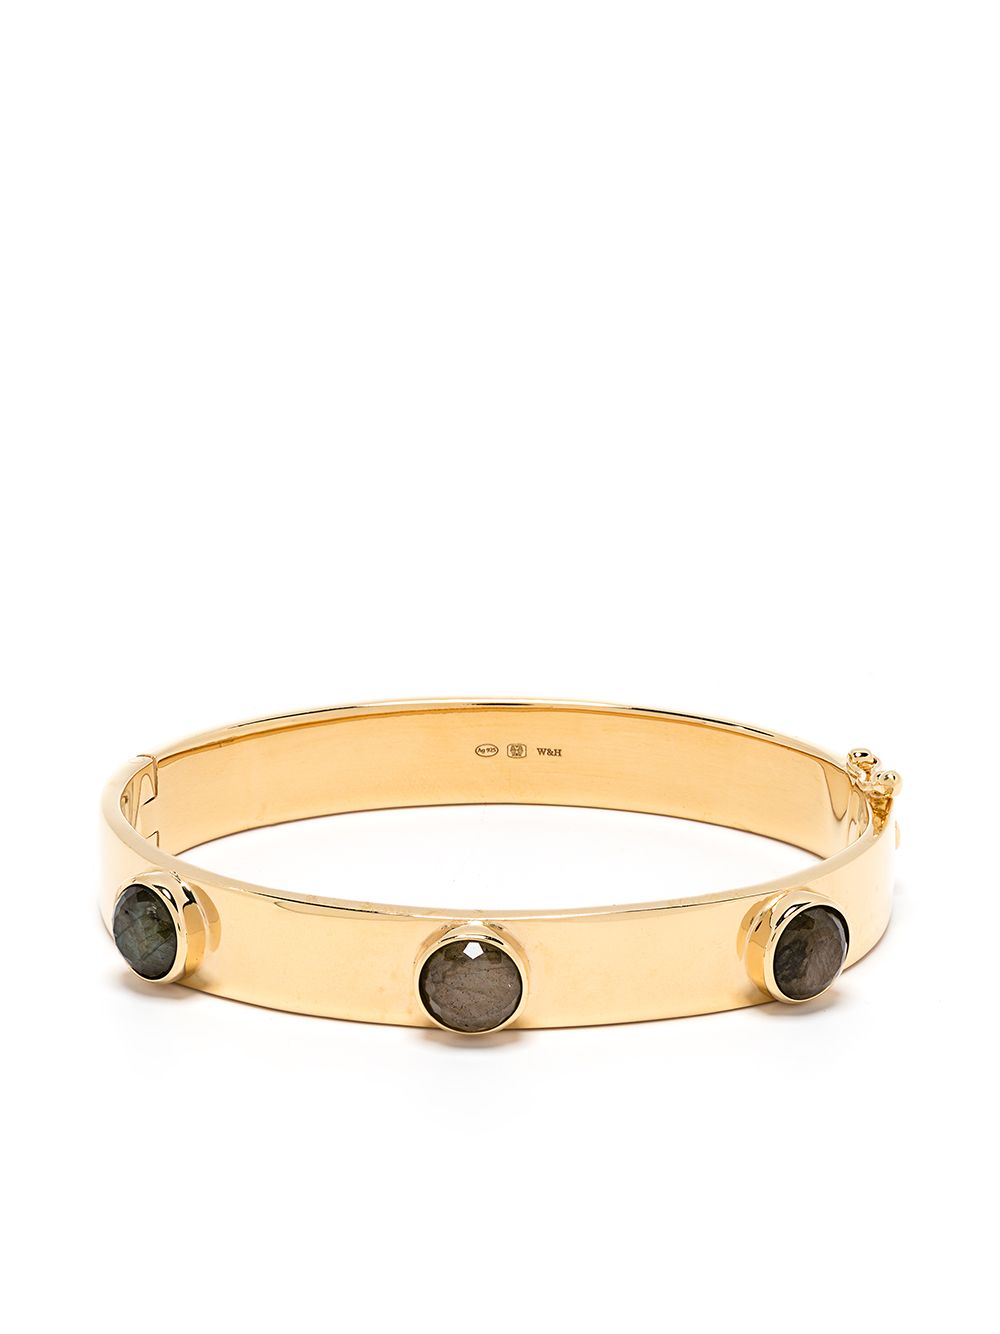 Wouters & Hendrix Forget the Lady with the Bracelet bangle - Gold von Wouters & Hendrix